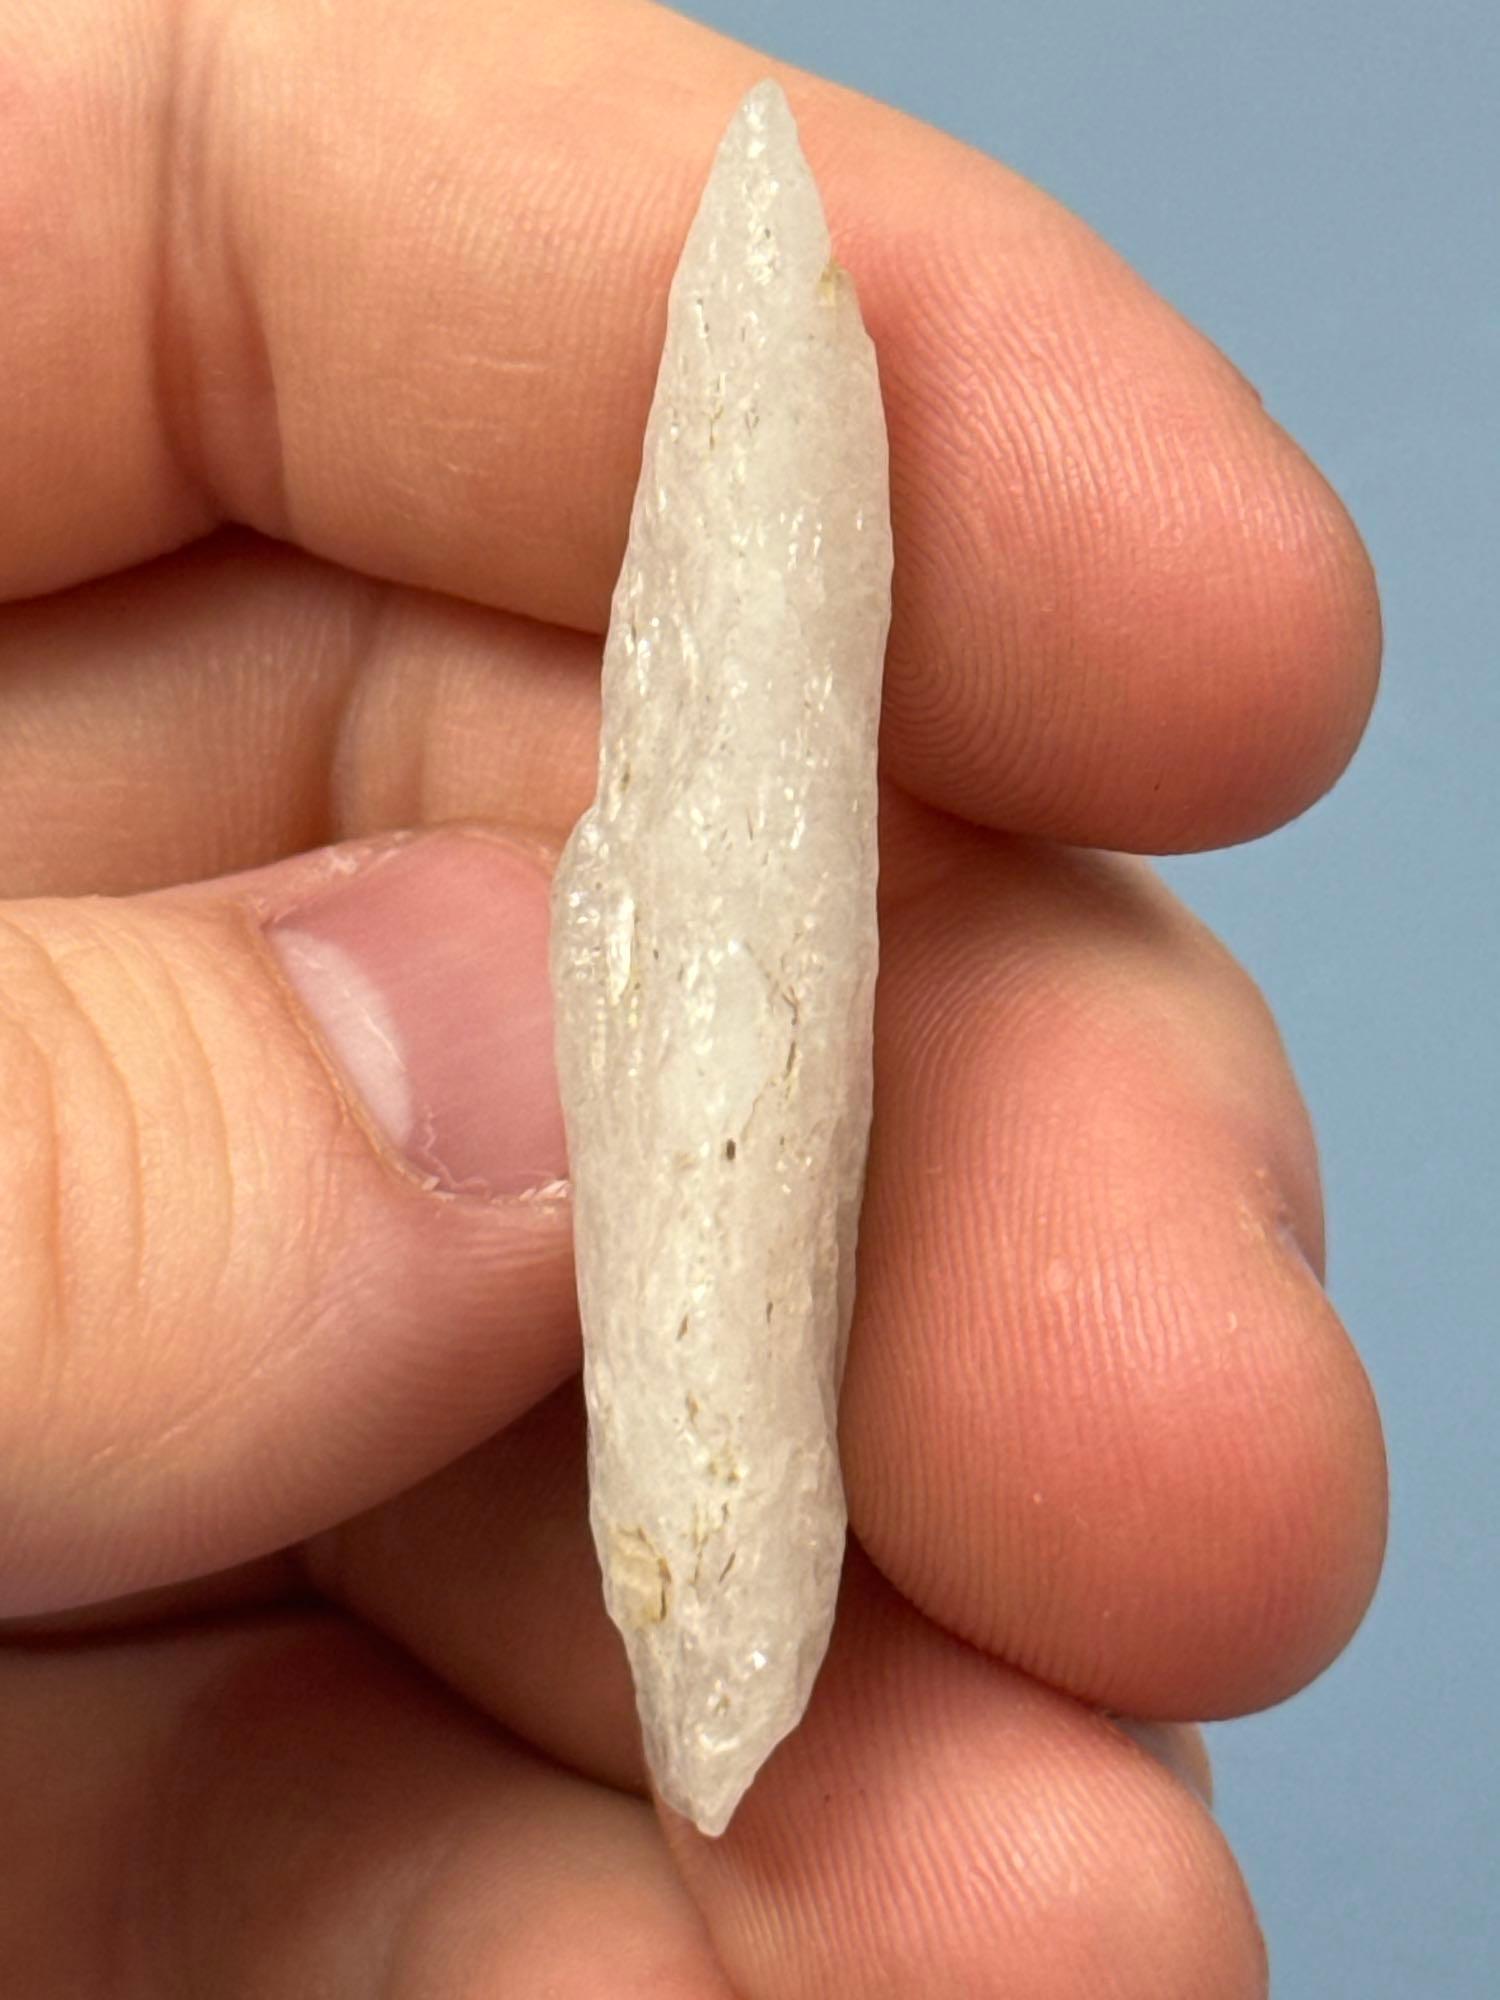 2" Well-Made Quartz Bare Island Point, Found in Burlington Co., New Jersey, Classic